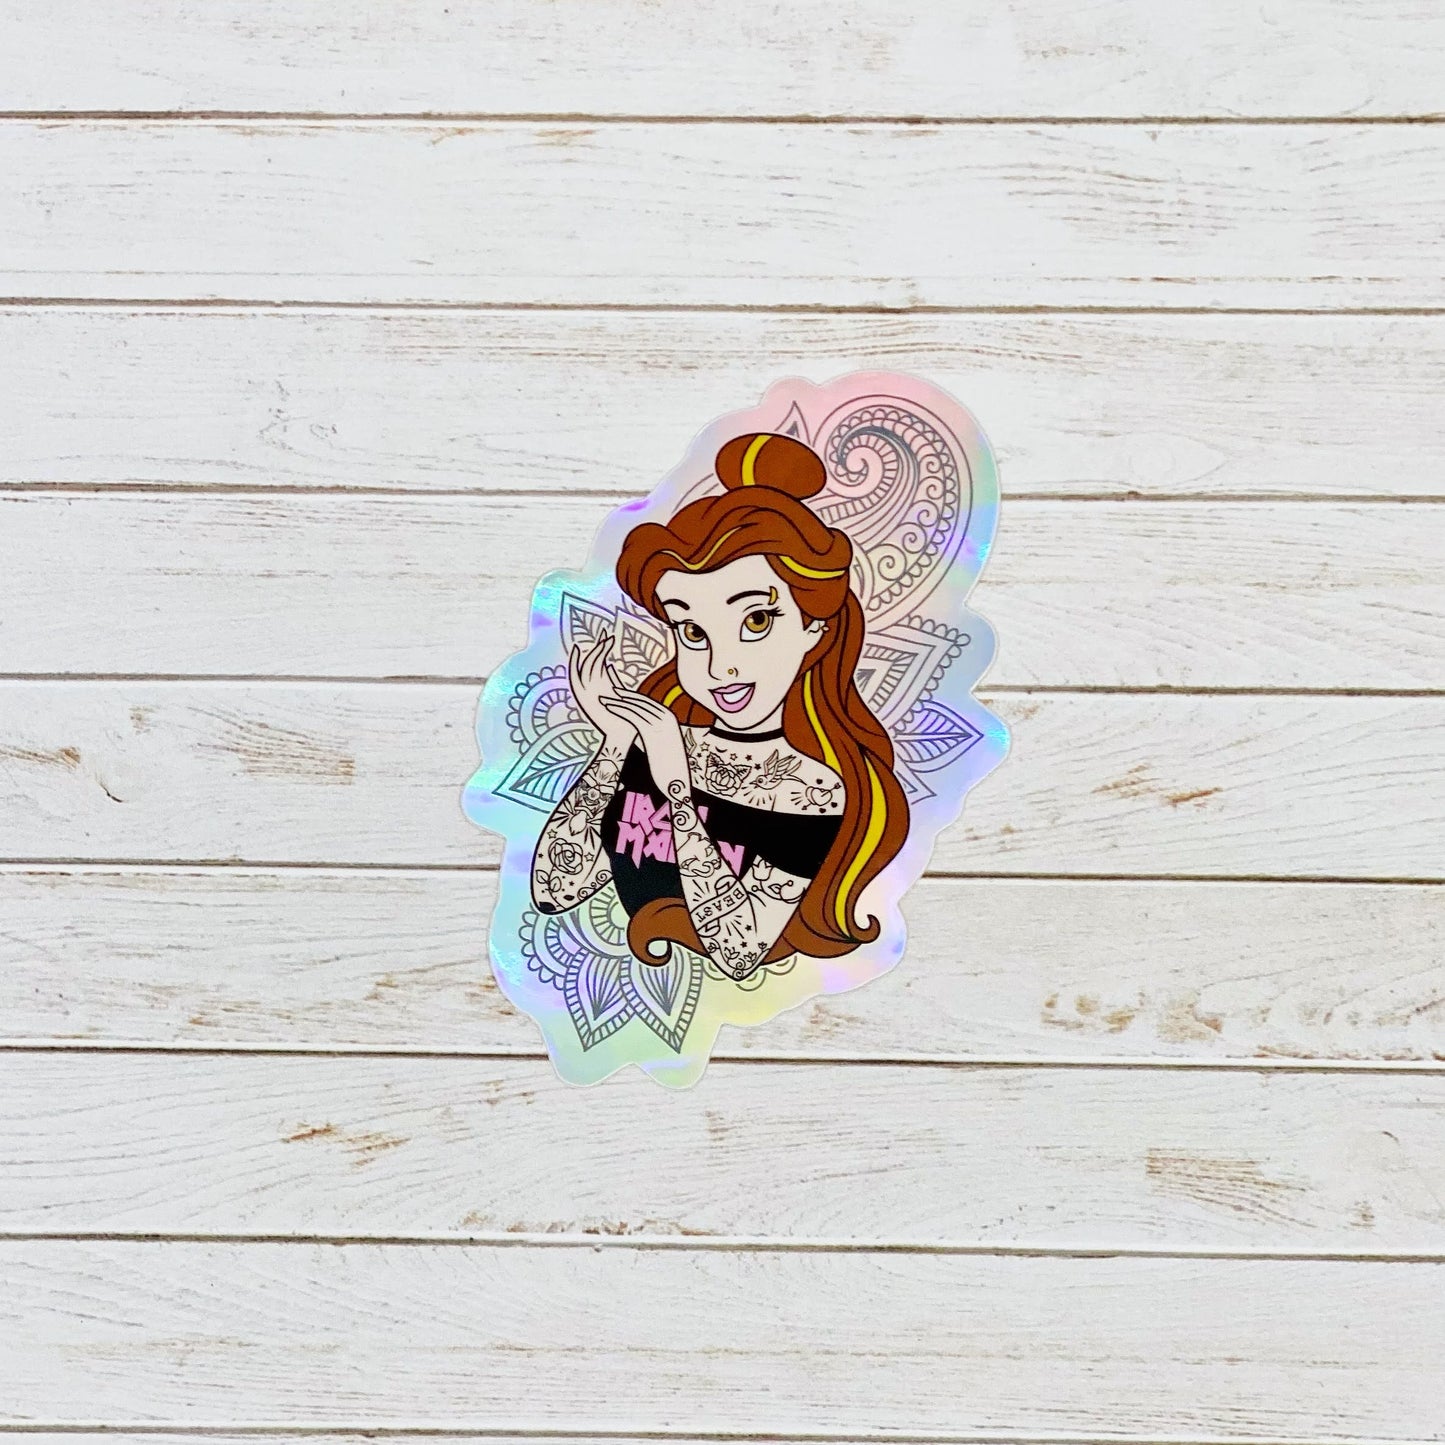 Punk Rock Princess - Modern Princess with Tattoos Holographic Vinyl Decal Stickers